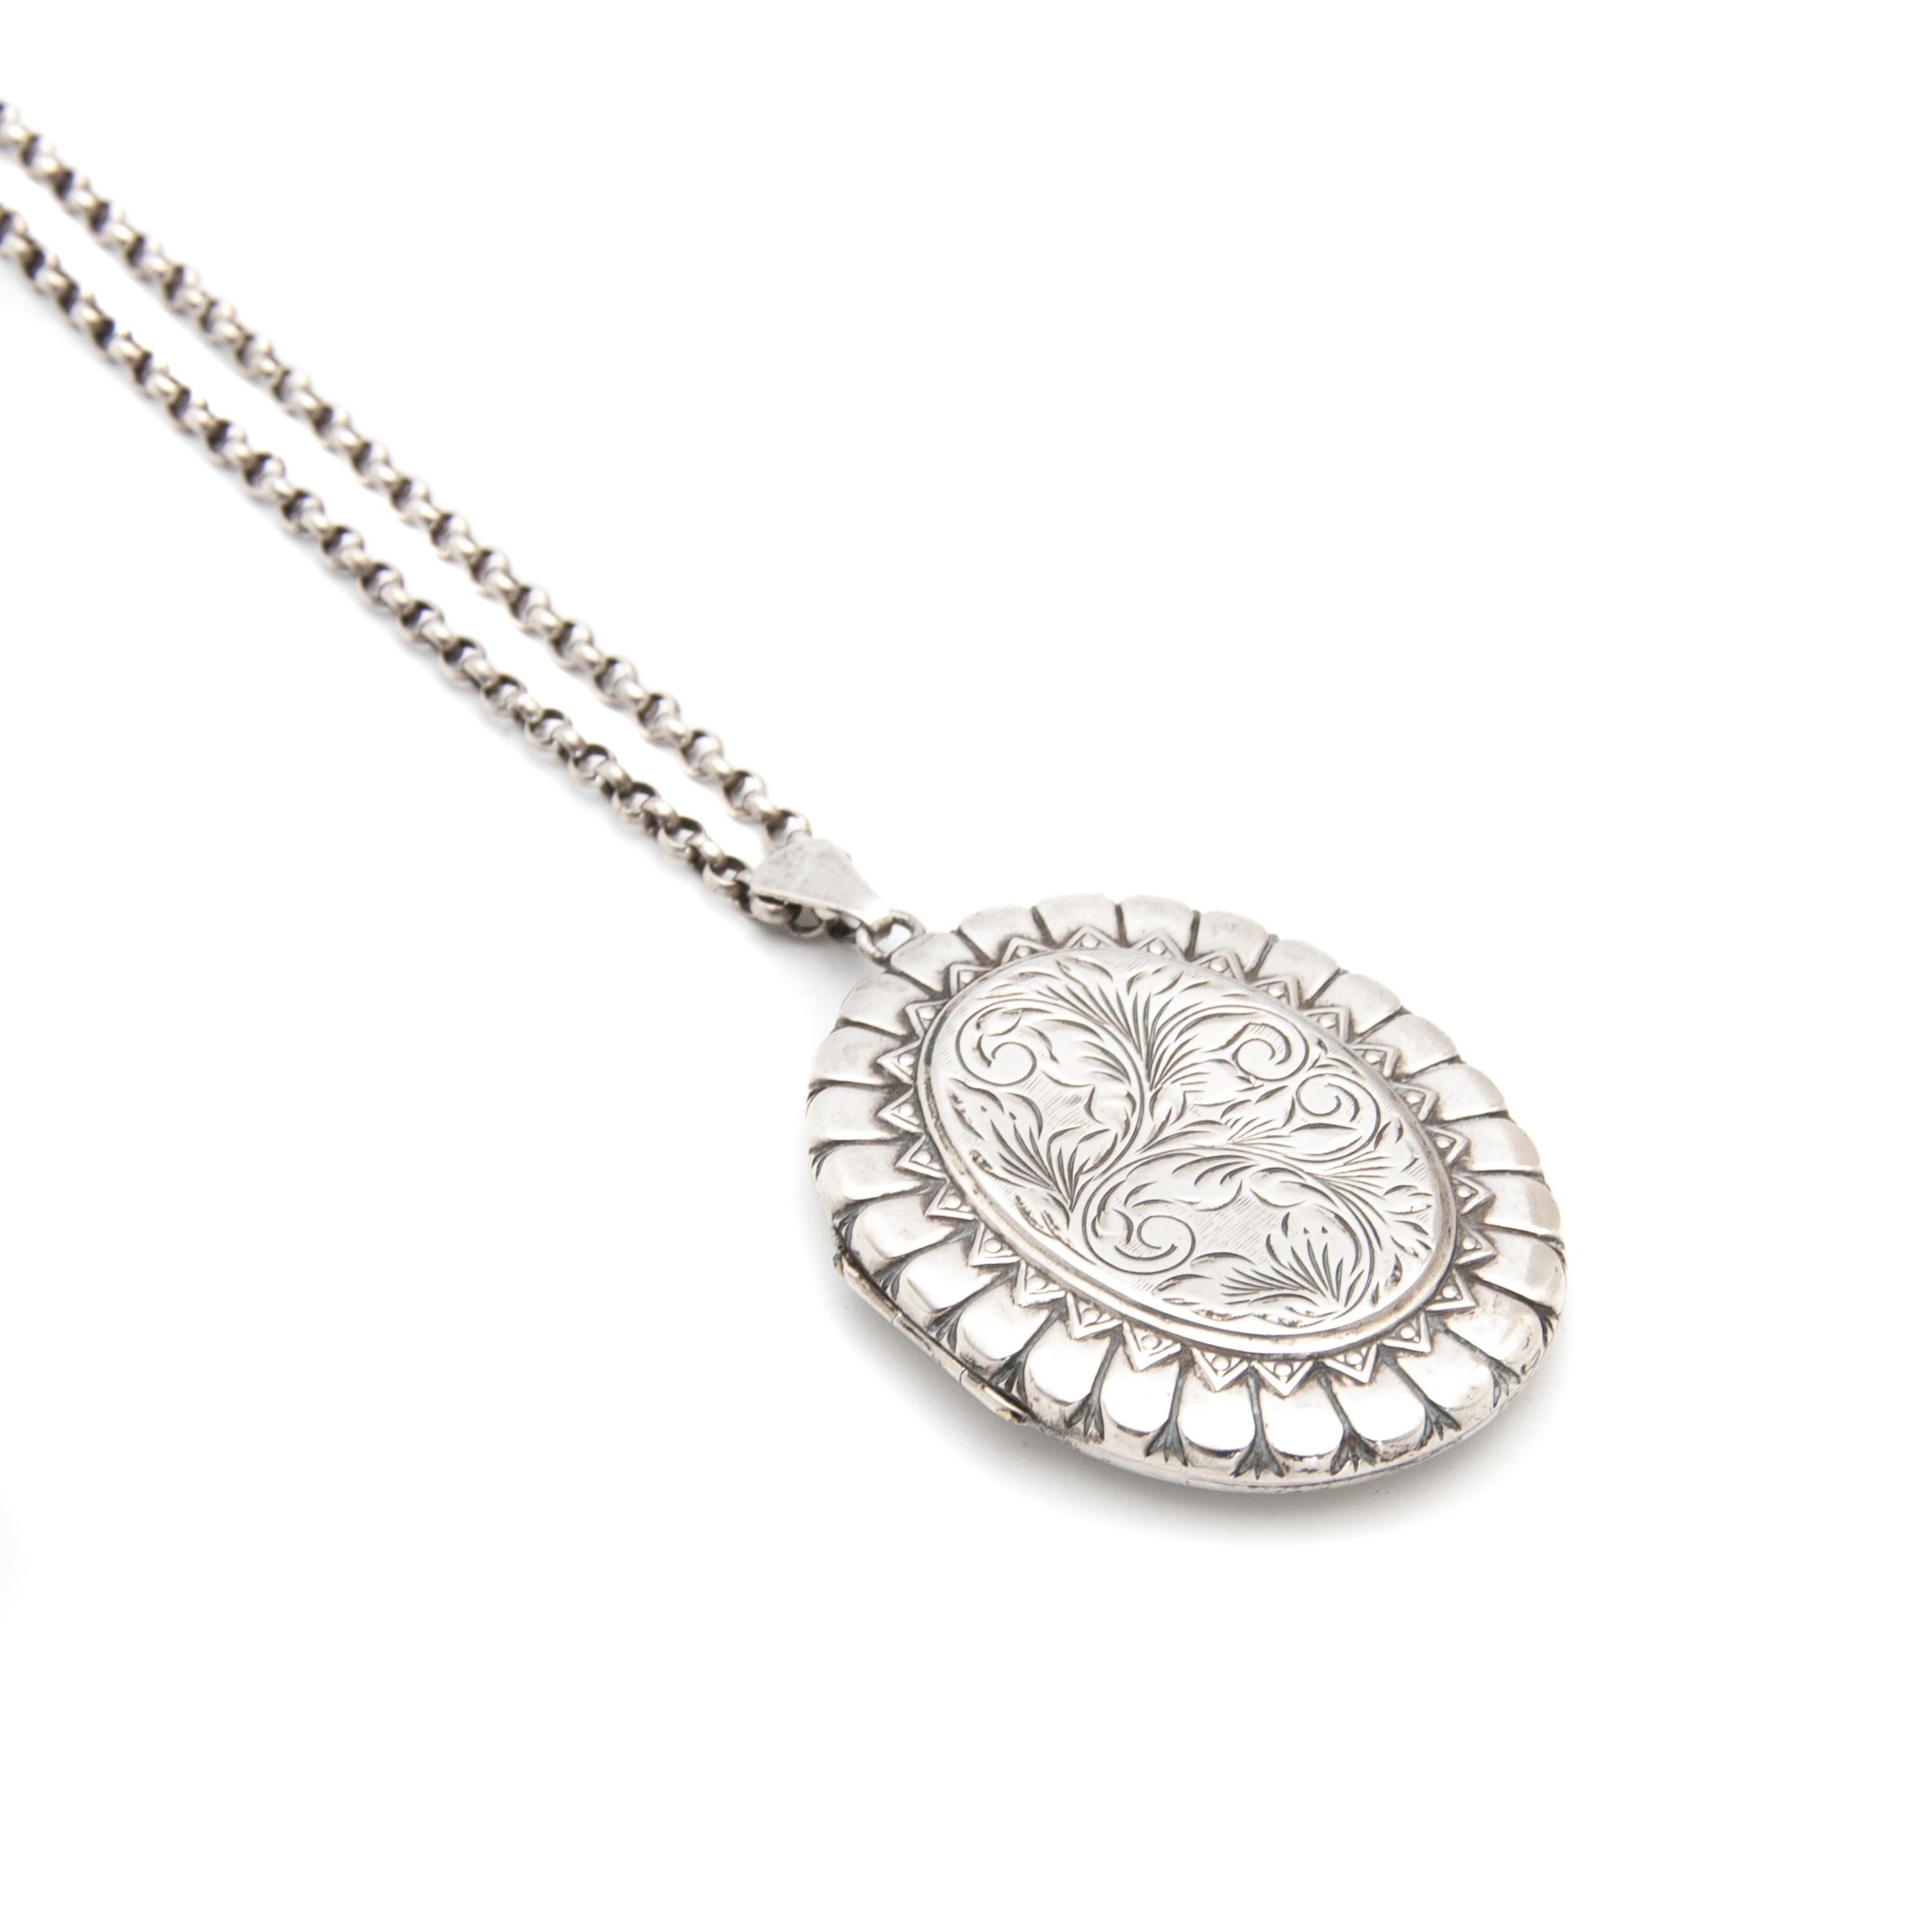 This English silver vintage locket pendant comes with this silver chain. The extra large silver locket has been beautifully hand chased with swirling plumes and the border has an etched design. In the frames you could place photographs of loved